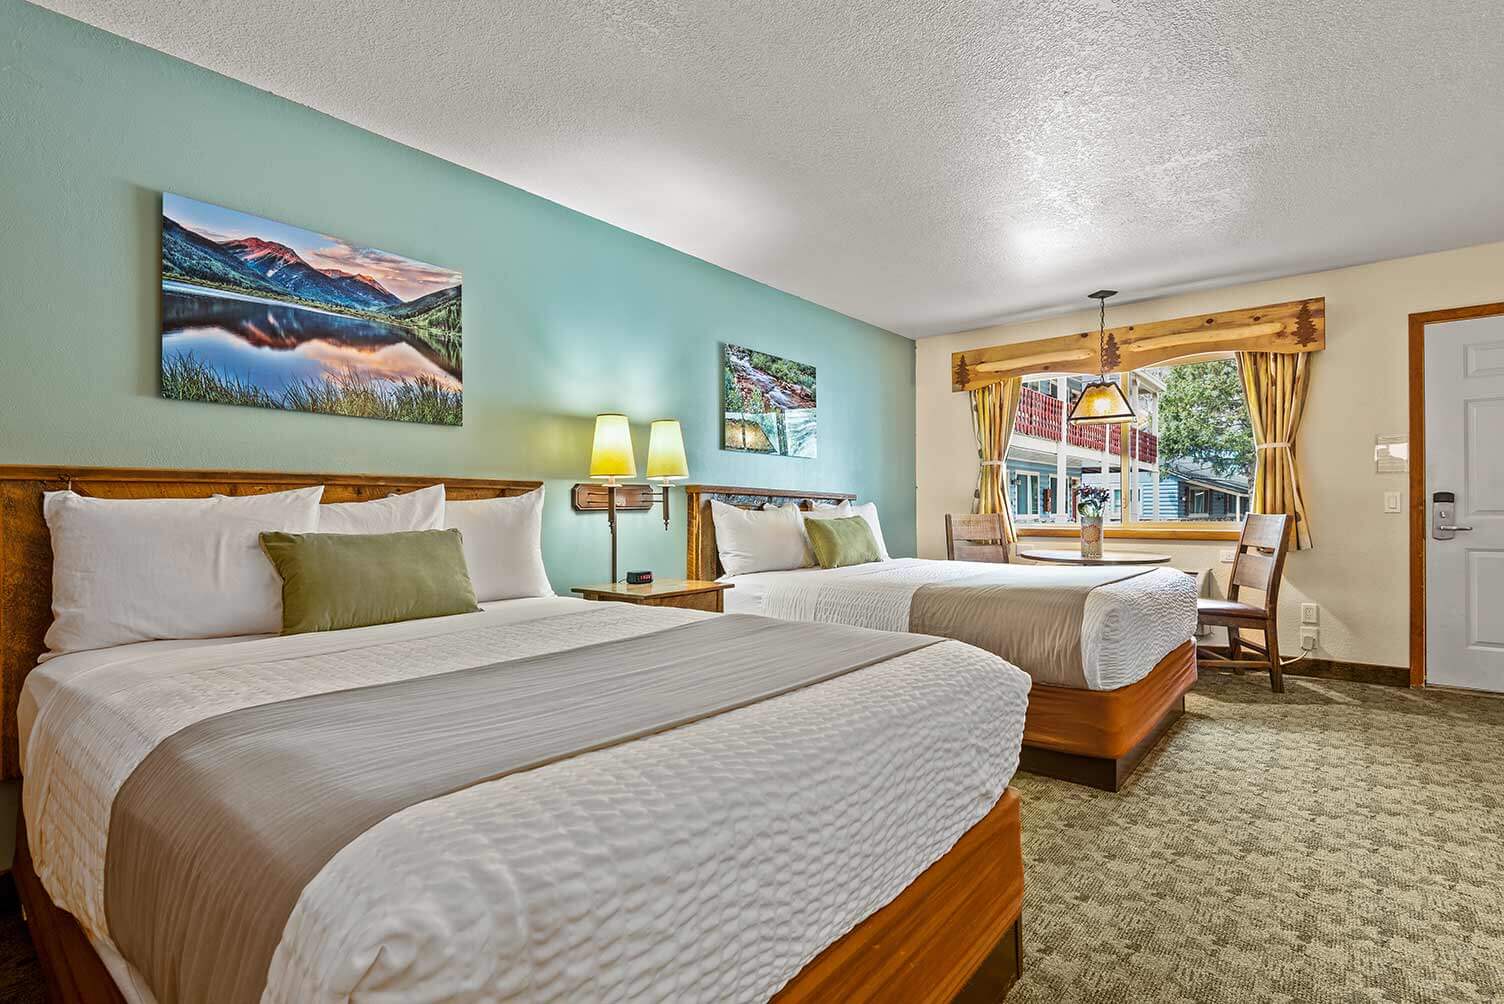 Room with two queen beds, green pillows, dining set next to the window and artwork of Colorado landscapes